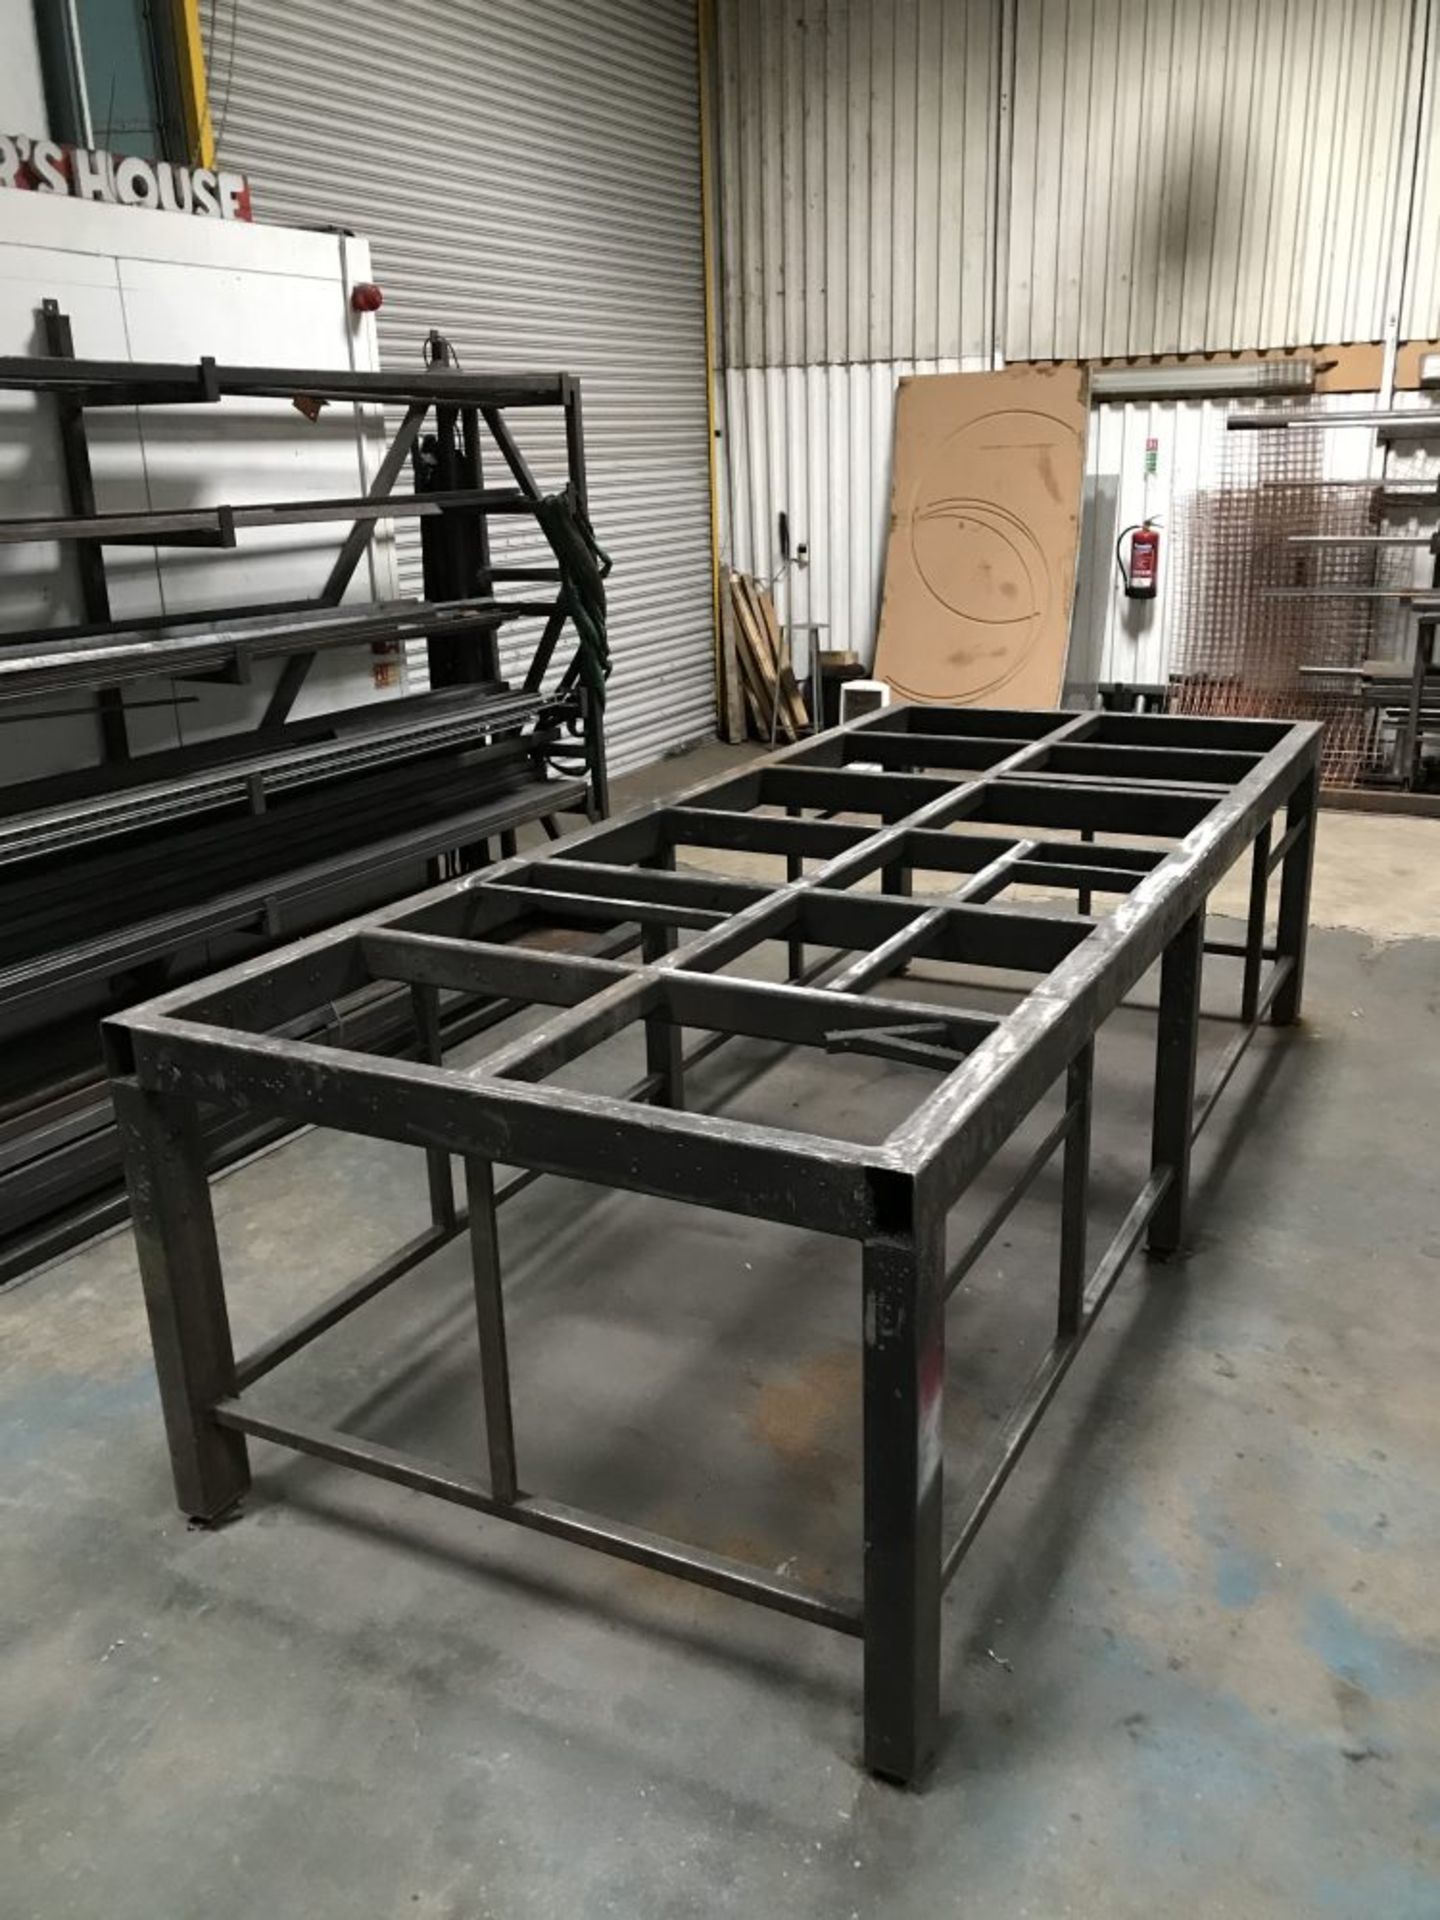 A welding table - Image 2 of 3